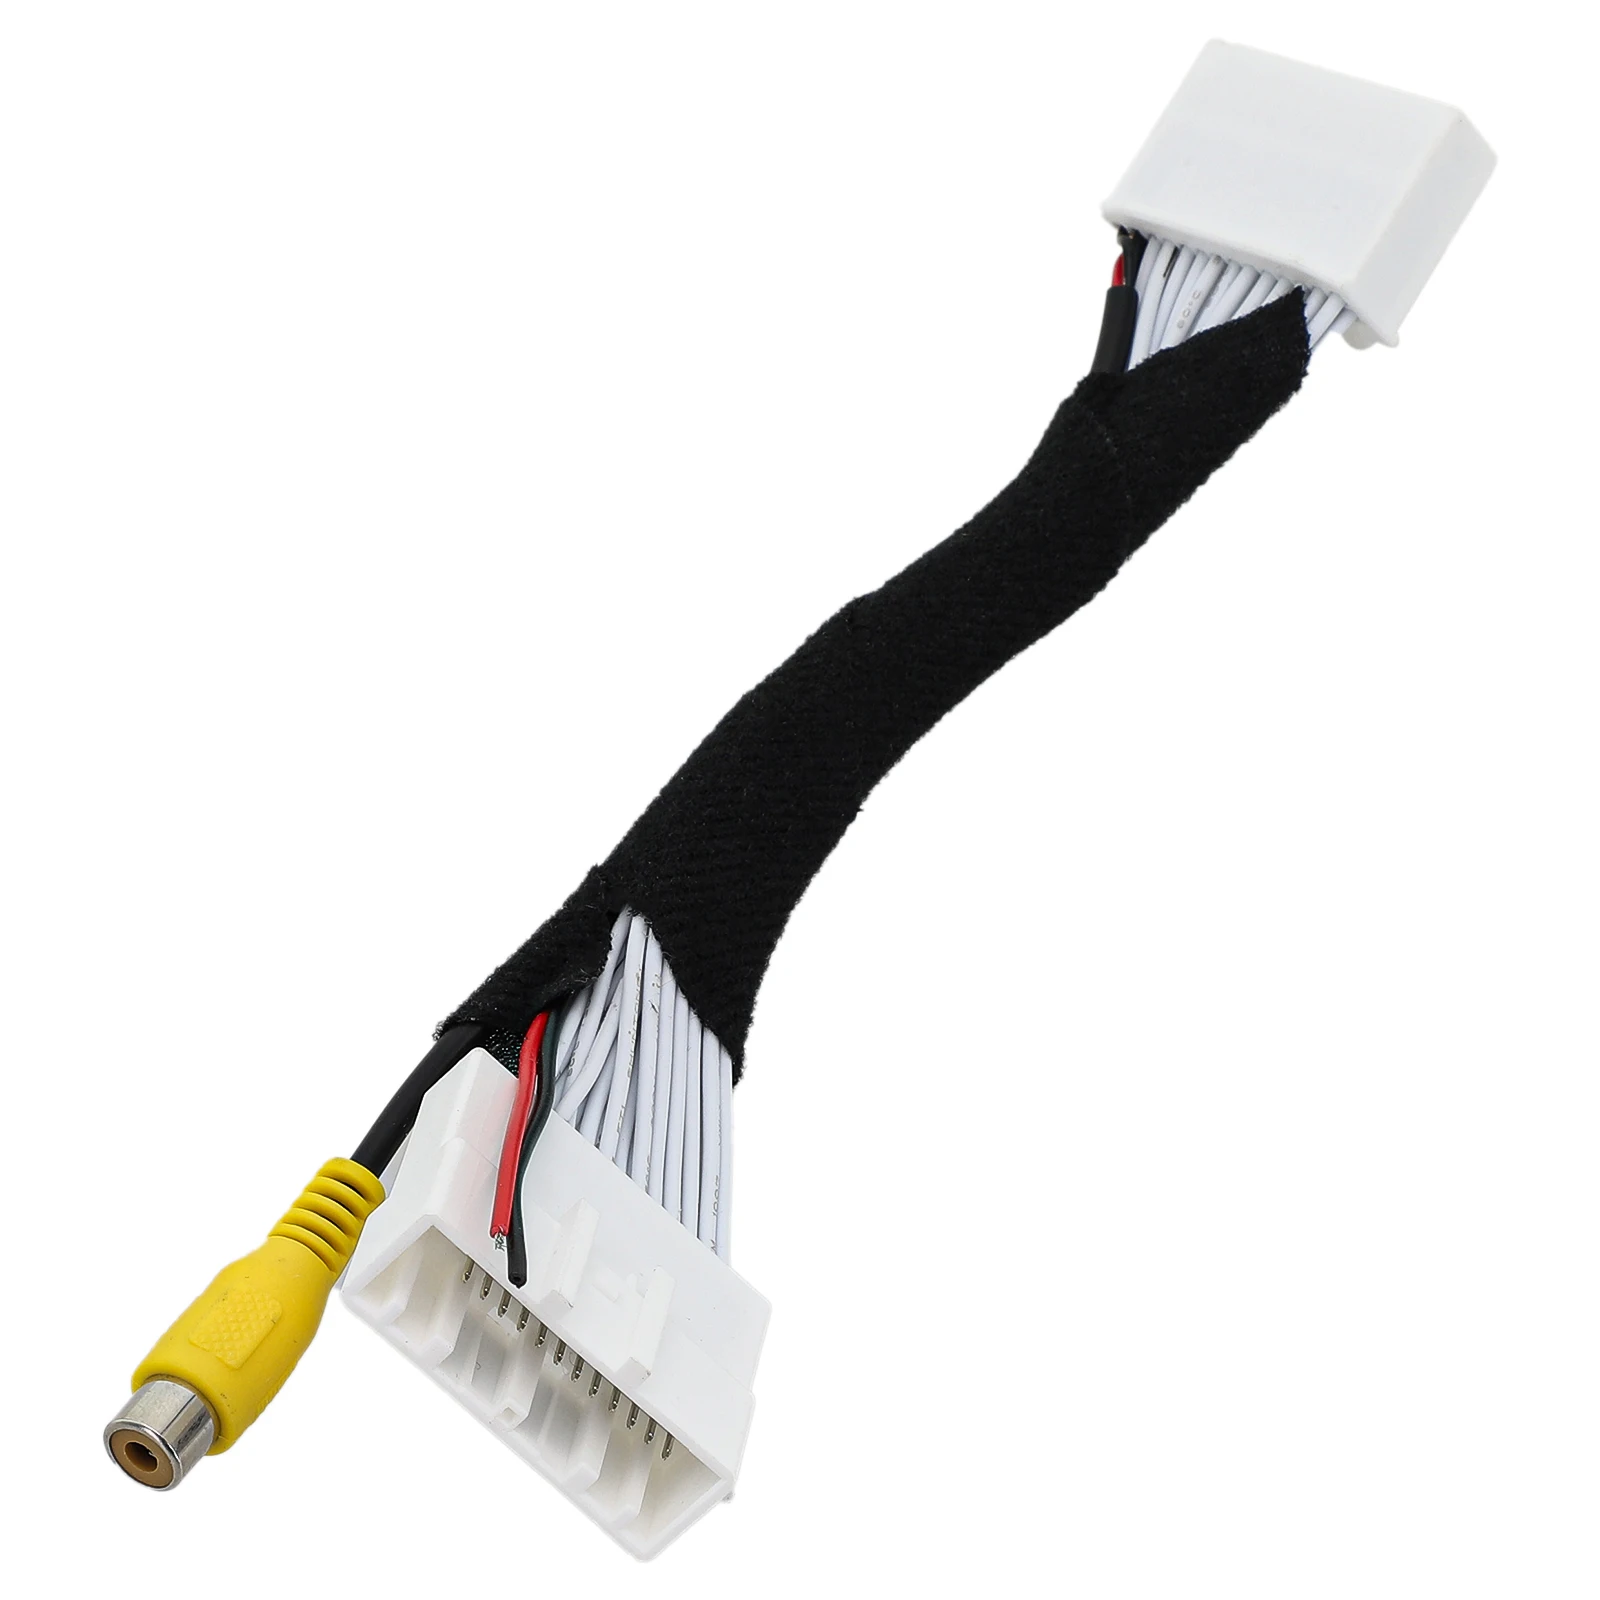 

1pc 12V Car Rear View Back Up Camera Video Input Cable Suitable For Mazda 2, CX-5 Adapter Replacement Accessories Plug And Play